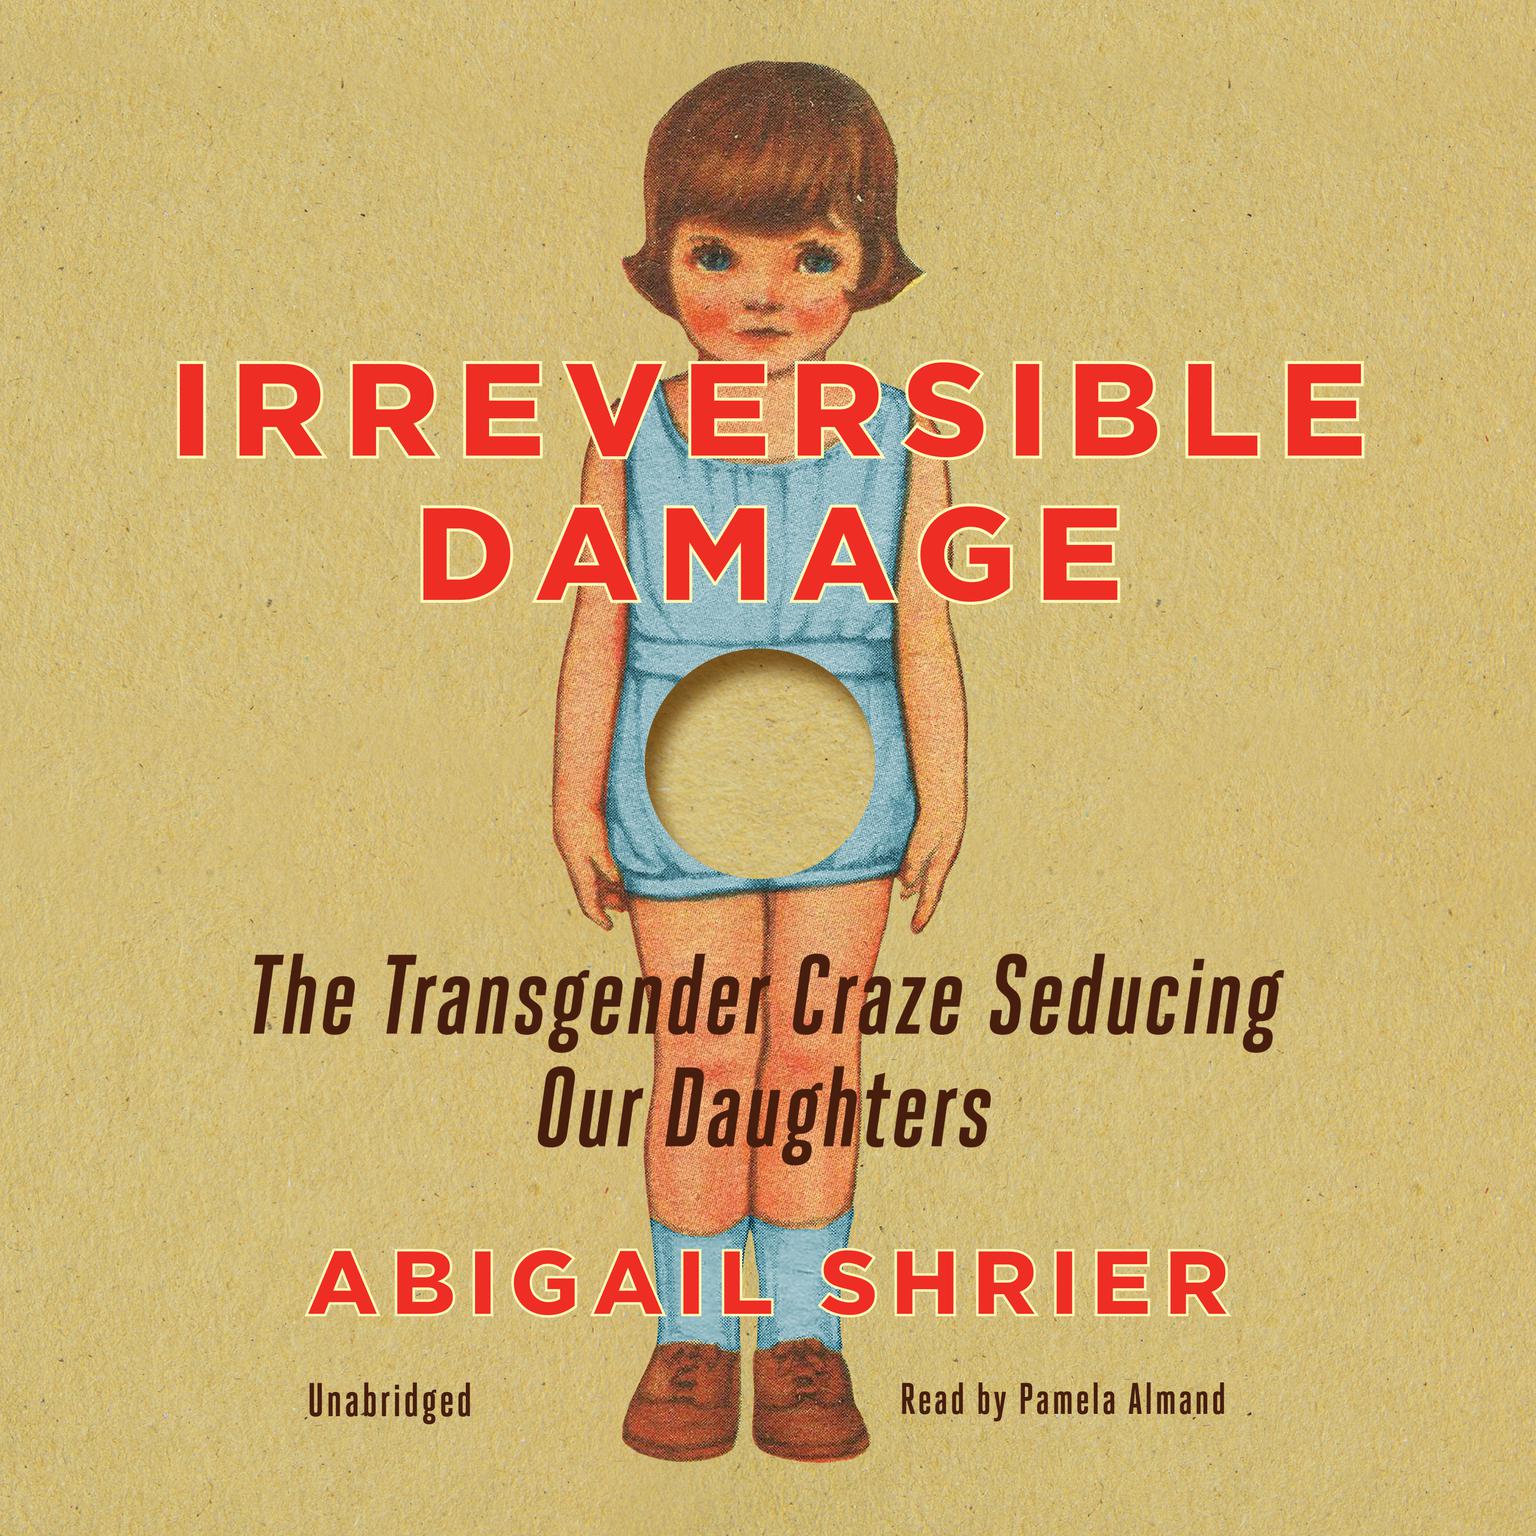 Irreversible Damage: The Transgender Craze Seducing Our Daughters Audiobook, by Abigail Shrier